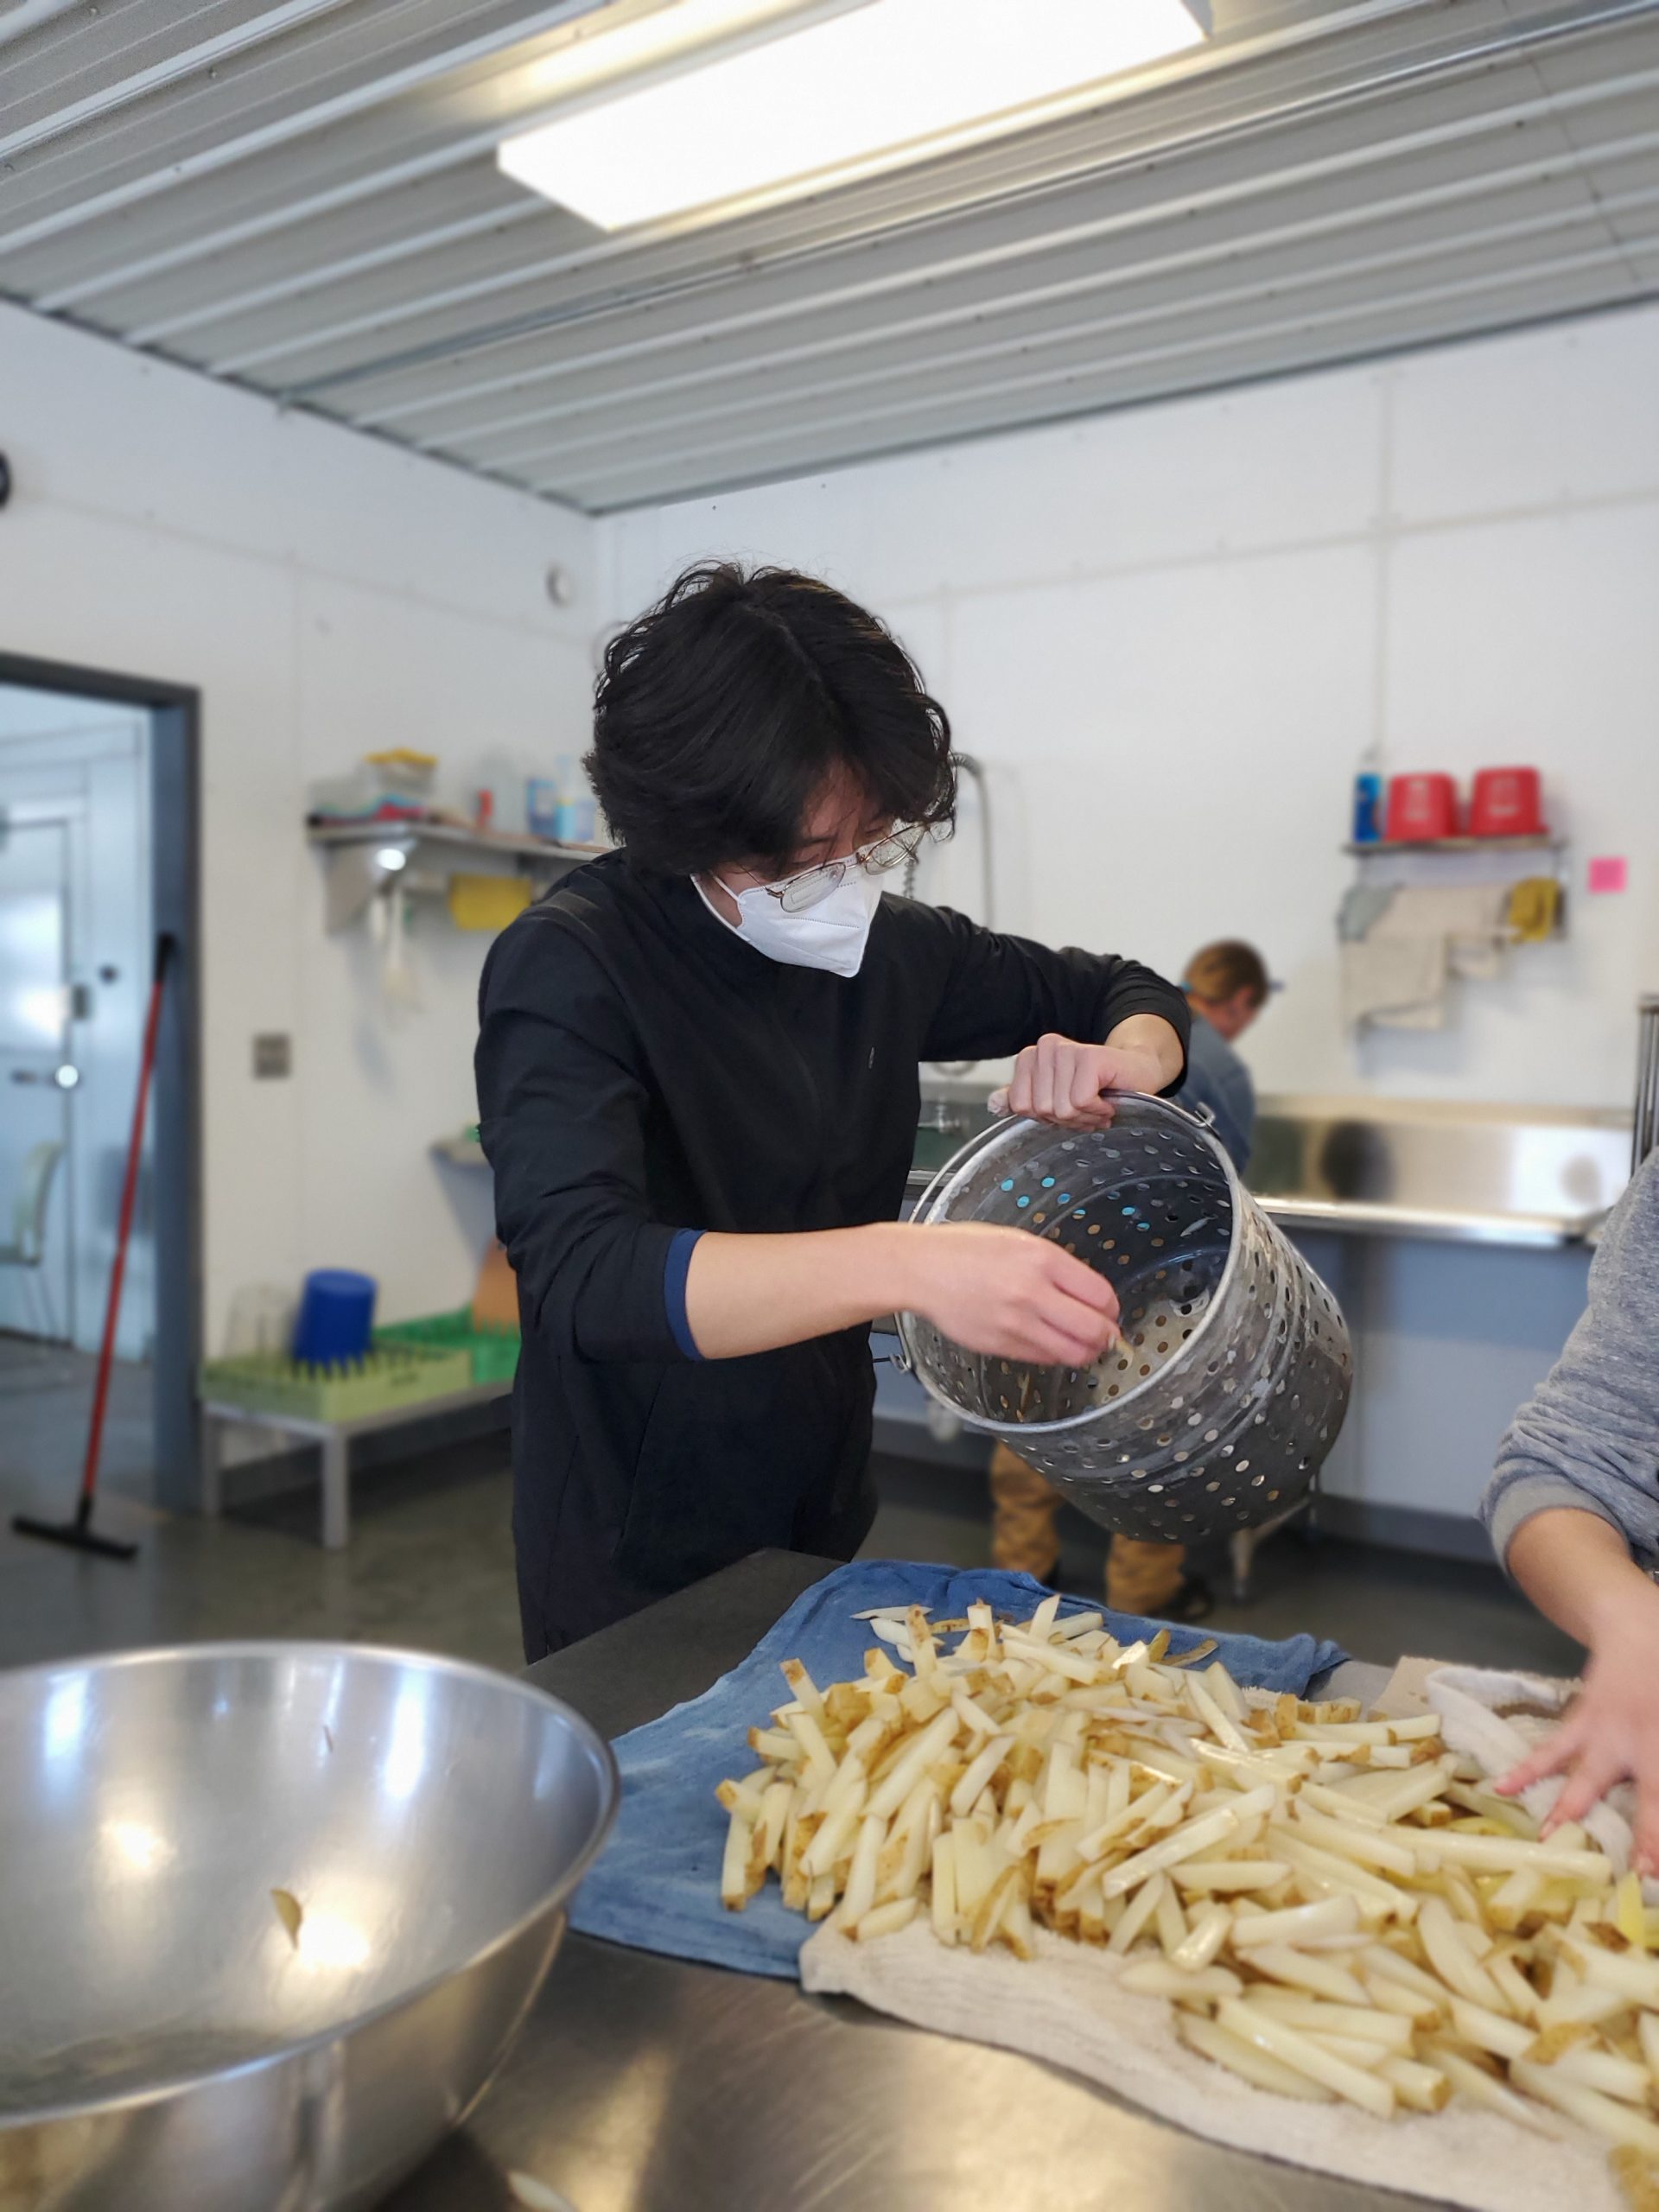 Bryan scoops French fries onto the table to be dried and oiled.